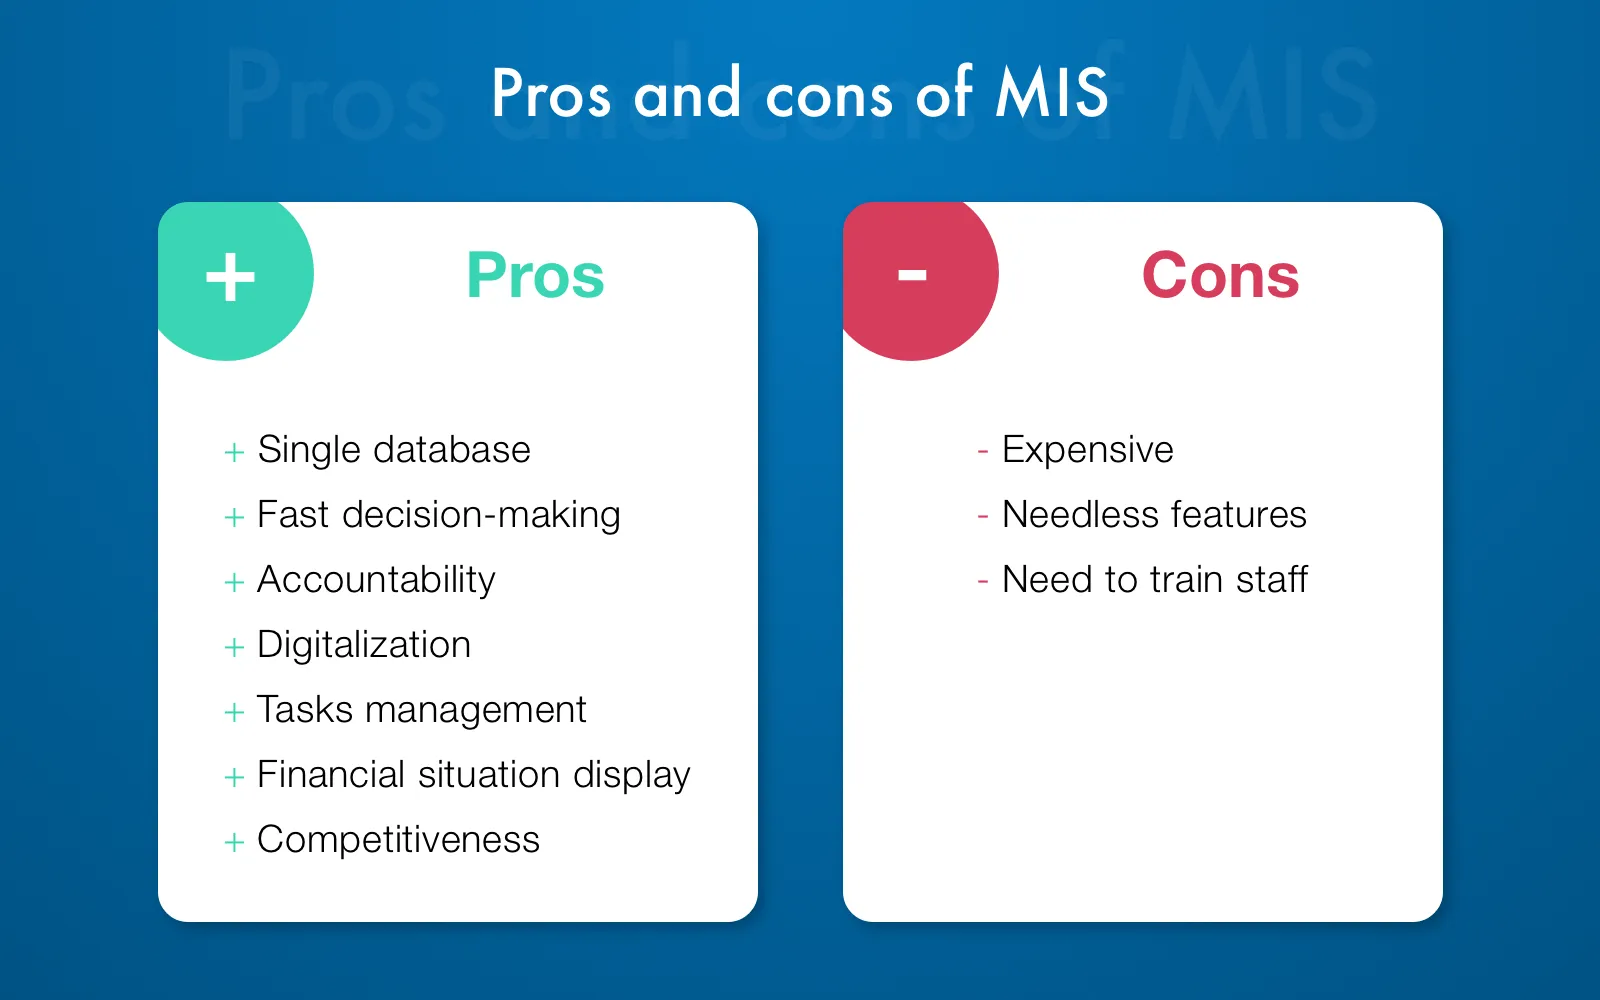 Advantages and disadvantages of using MIS